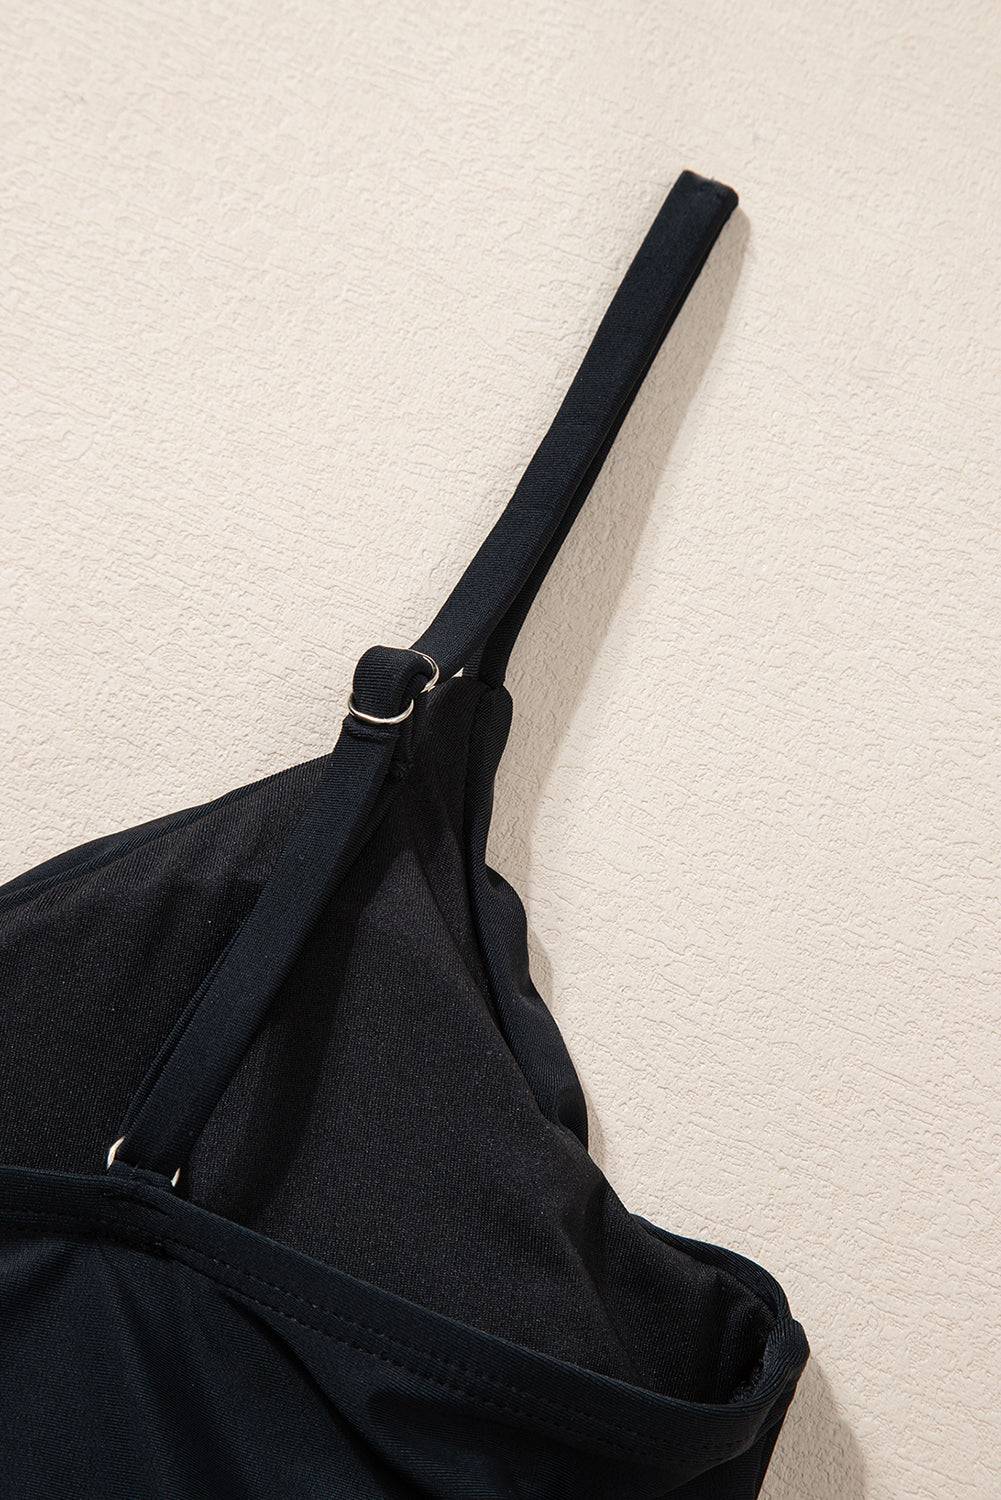 a black bag hanging up against a wall